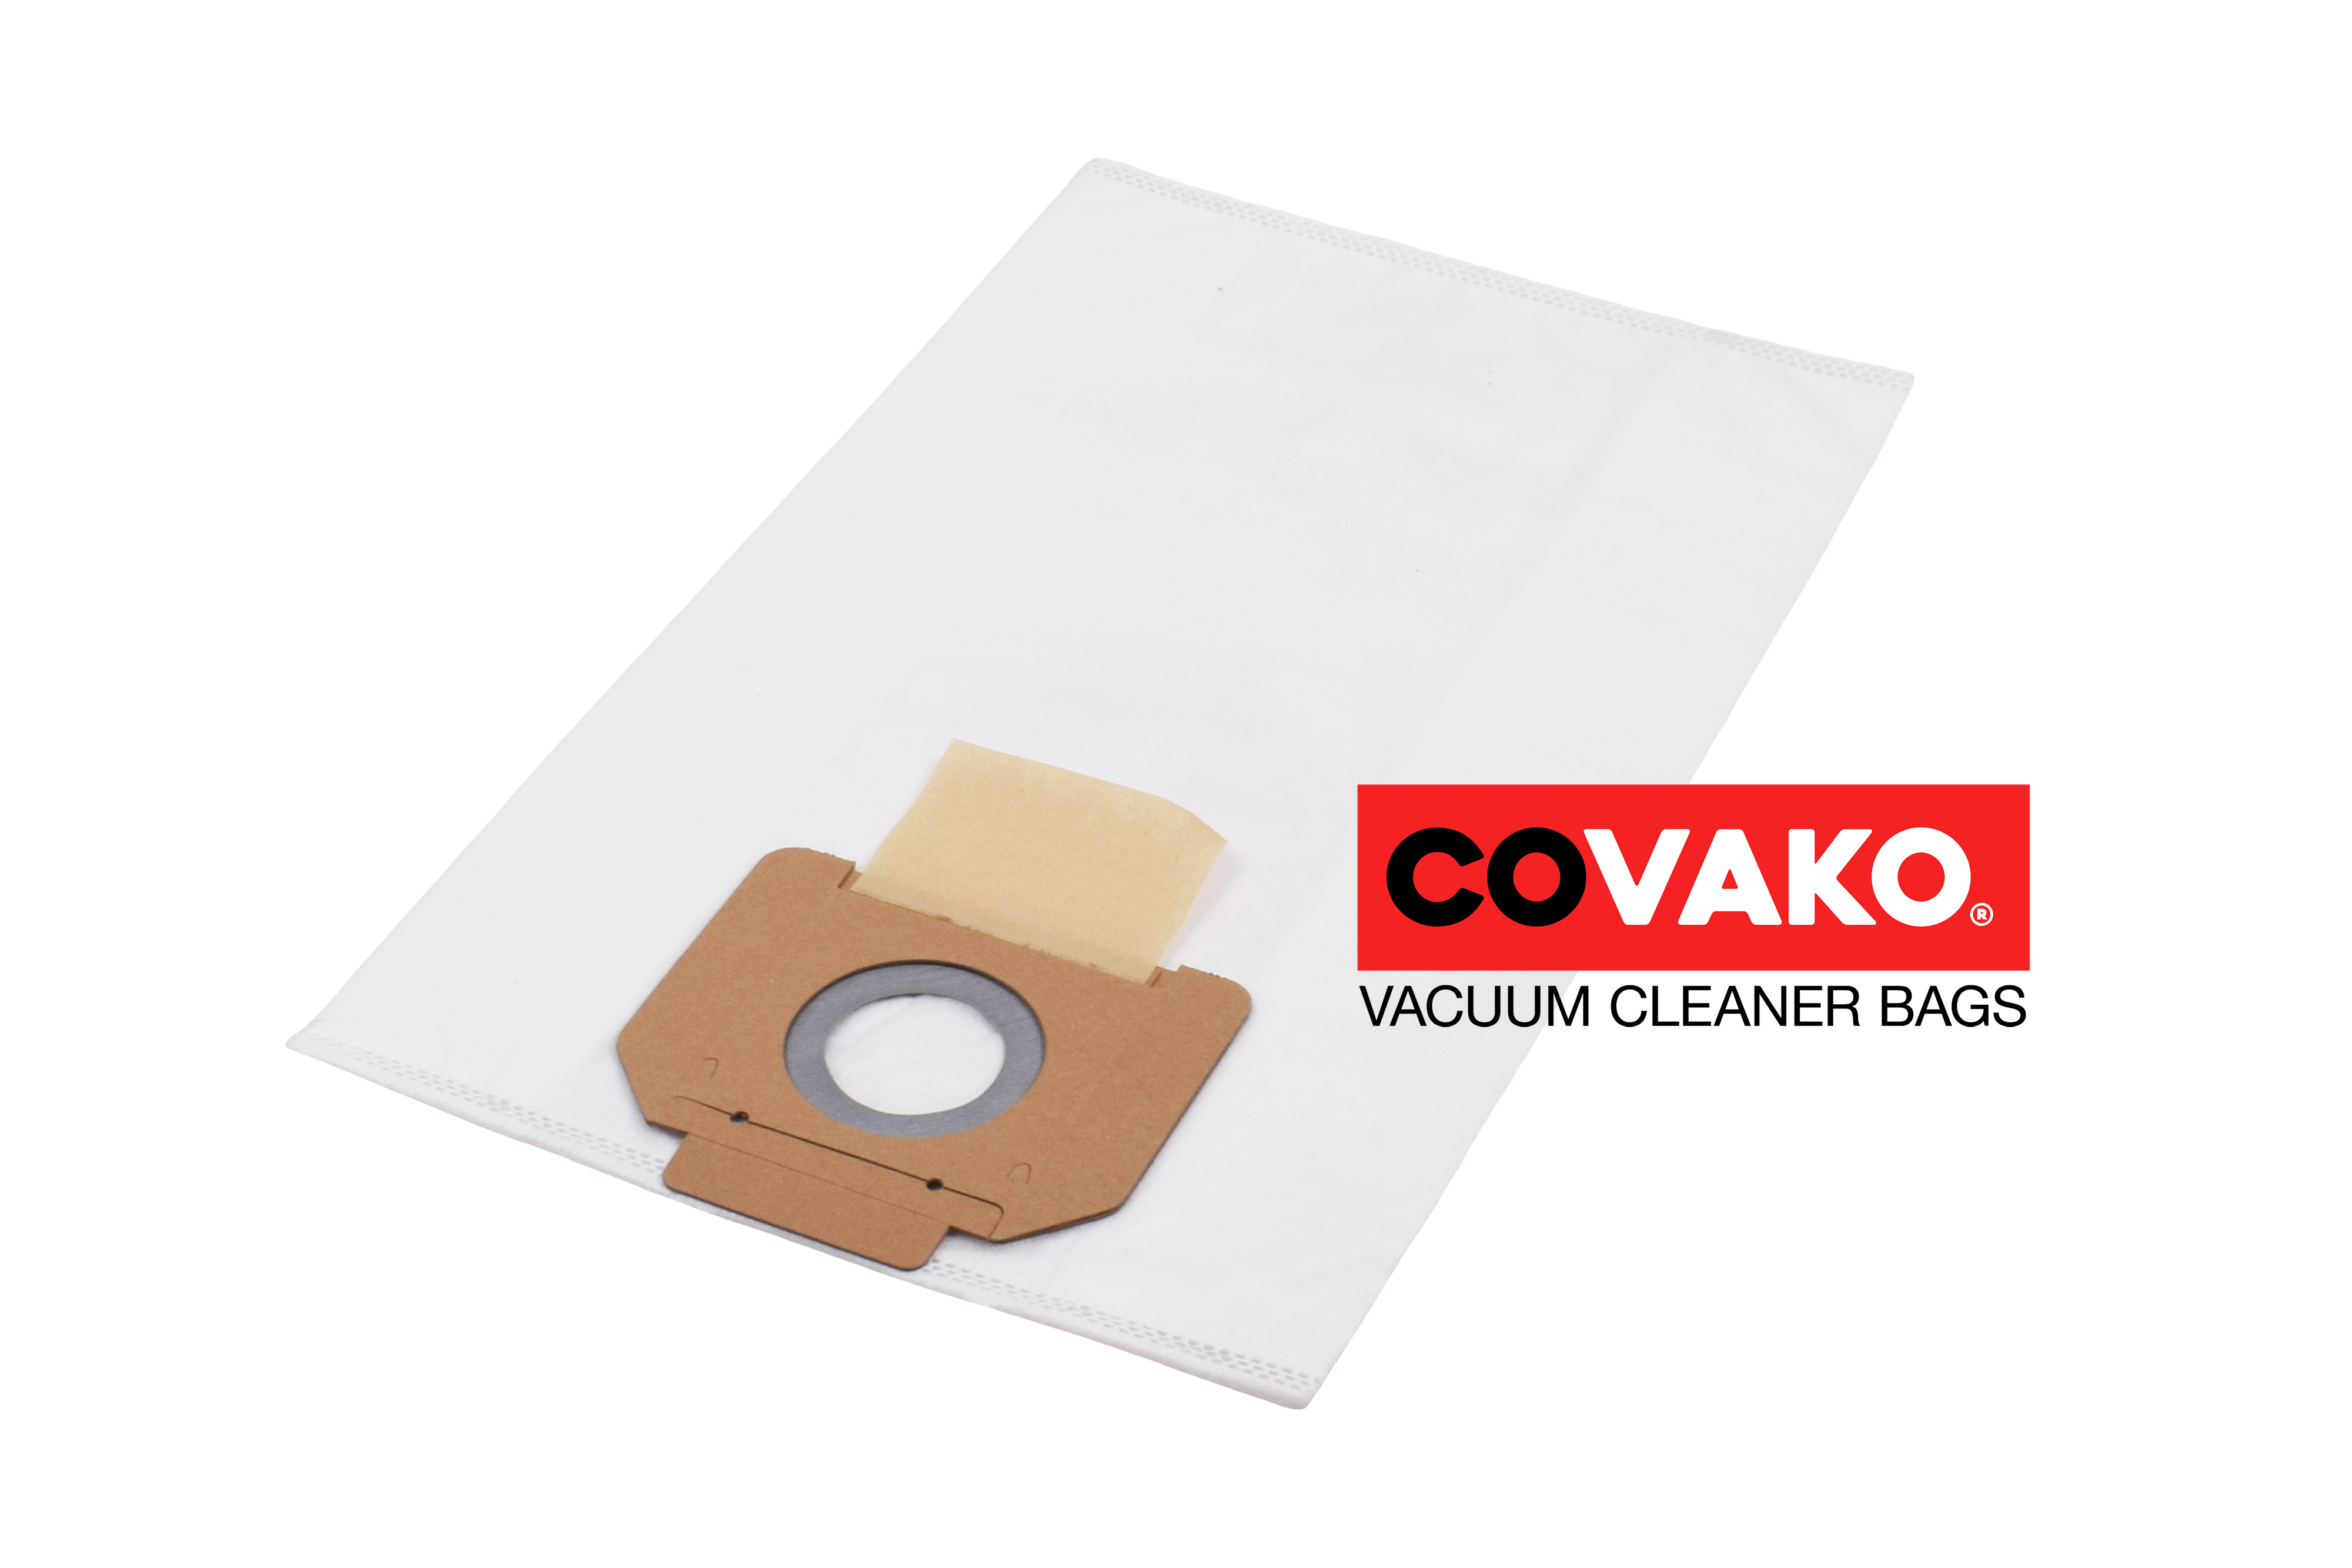 IPC YP 1400/20 / Synthesis - IPC vacuum cleaner bags